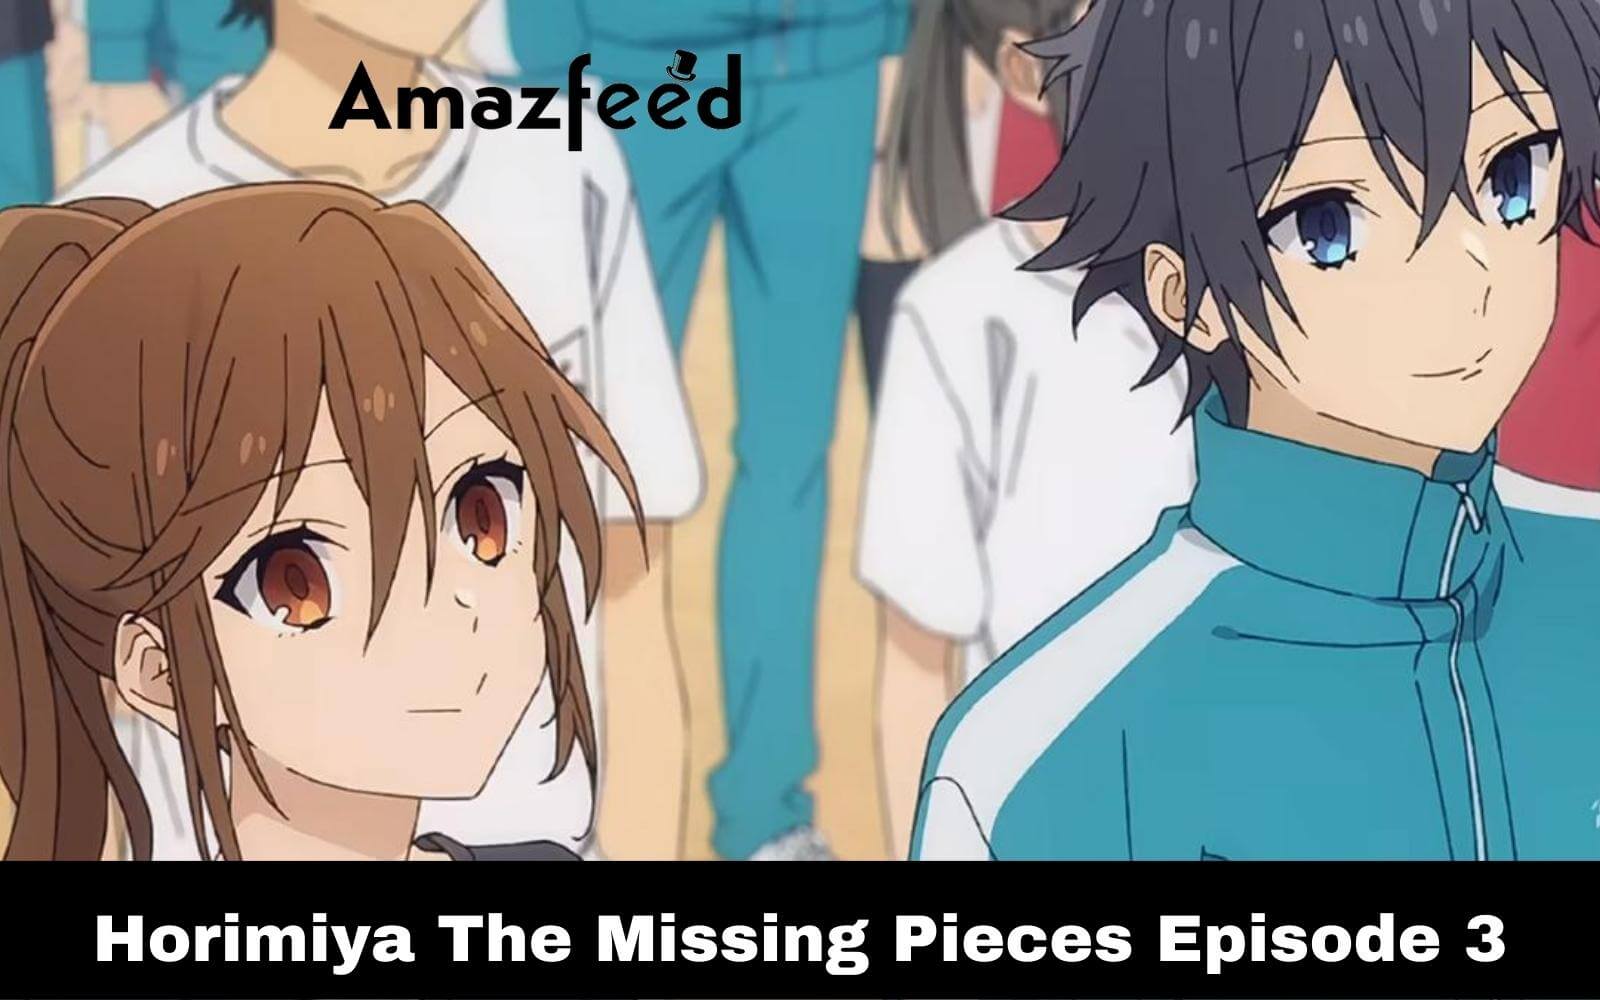 Horimiya: The Missing Pieces Anime: Where to Watch, Trailer